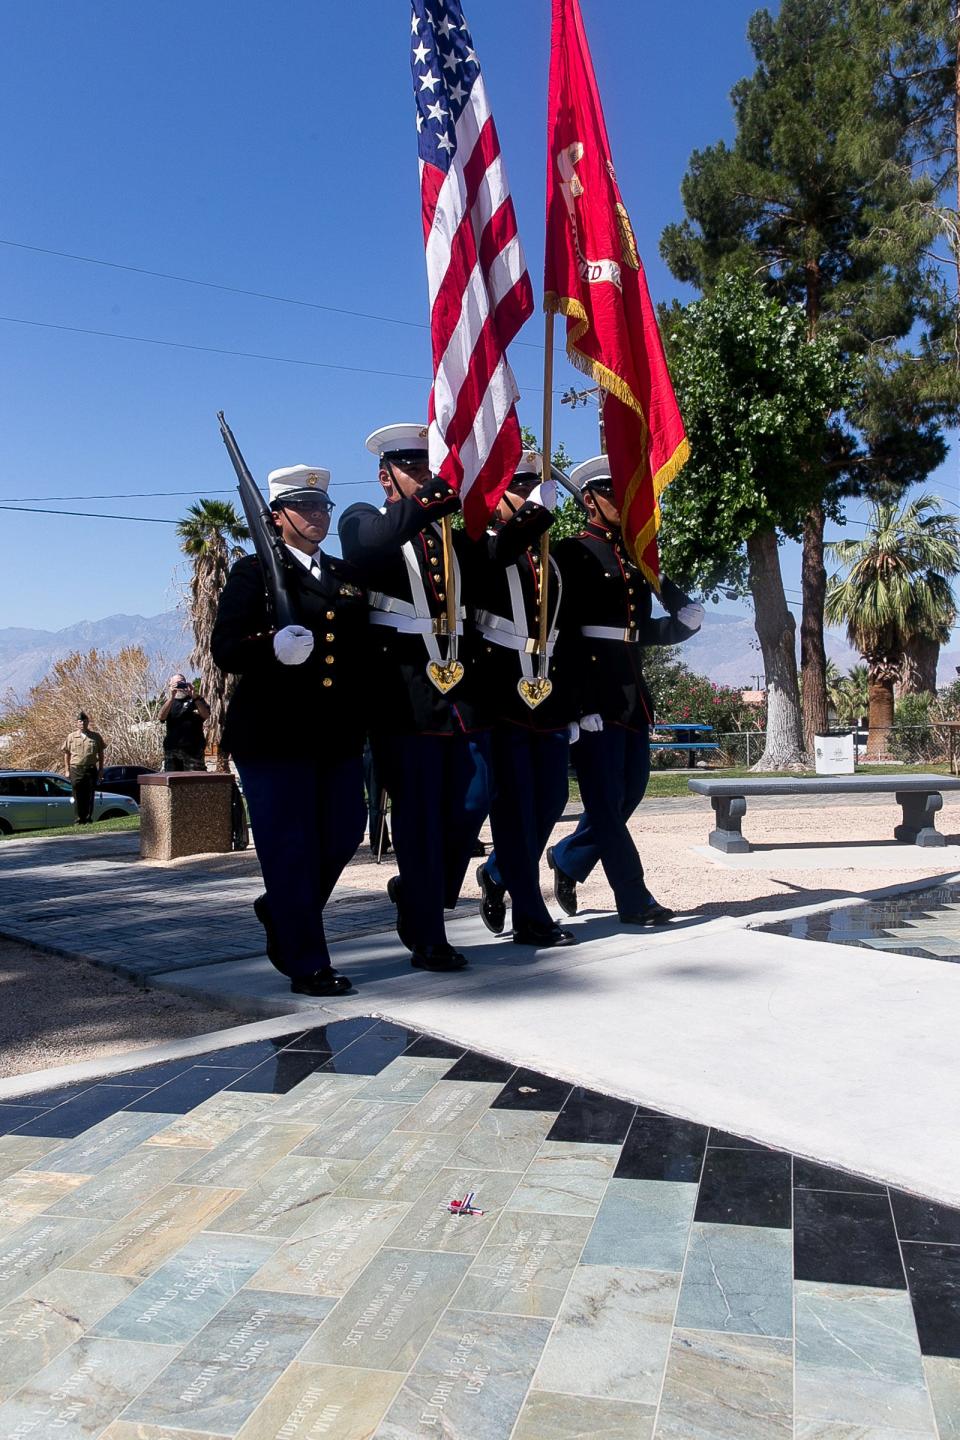 The Desert Hot Springs Junior ROTC present Colors during a ceremony held at Veterans' Memorial Park in Desert Hot Springs on Monday, May 26, 2014.